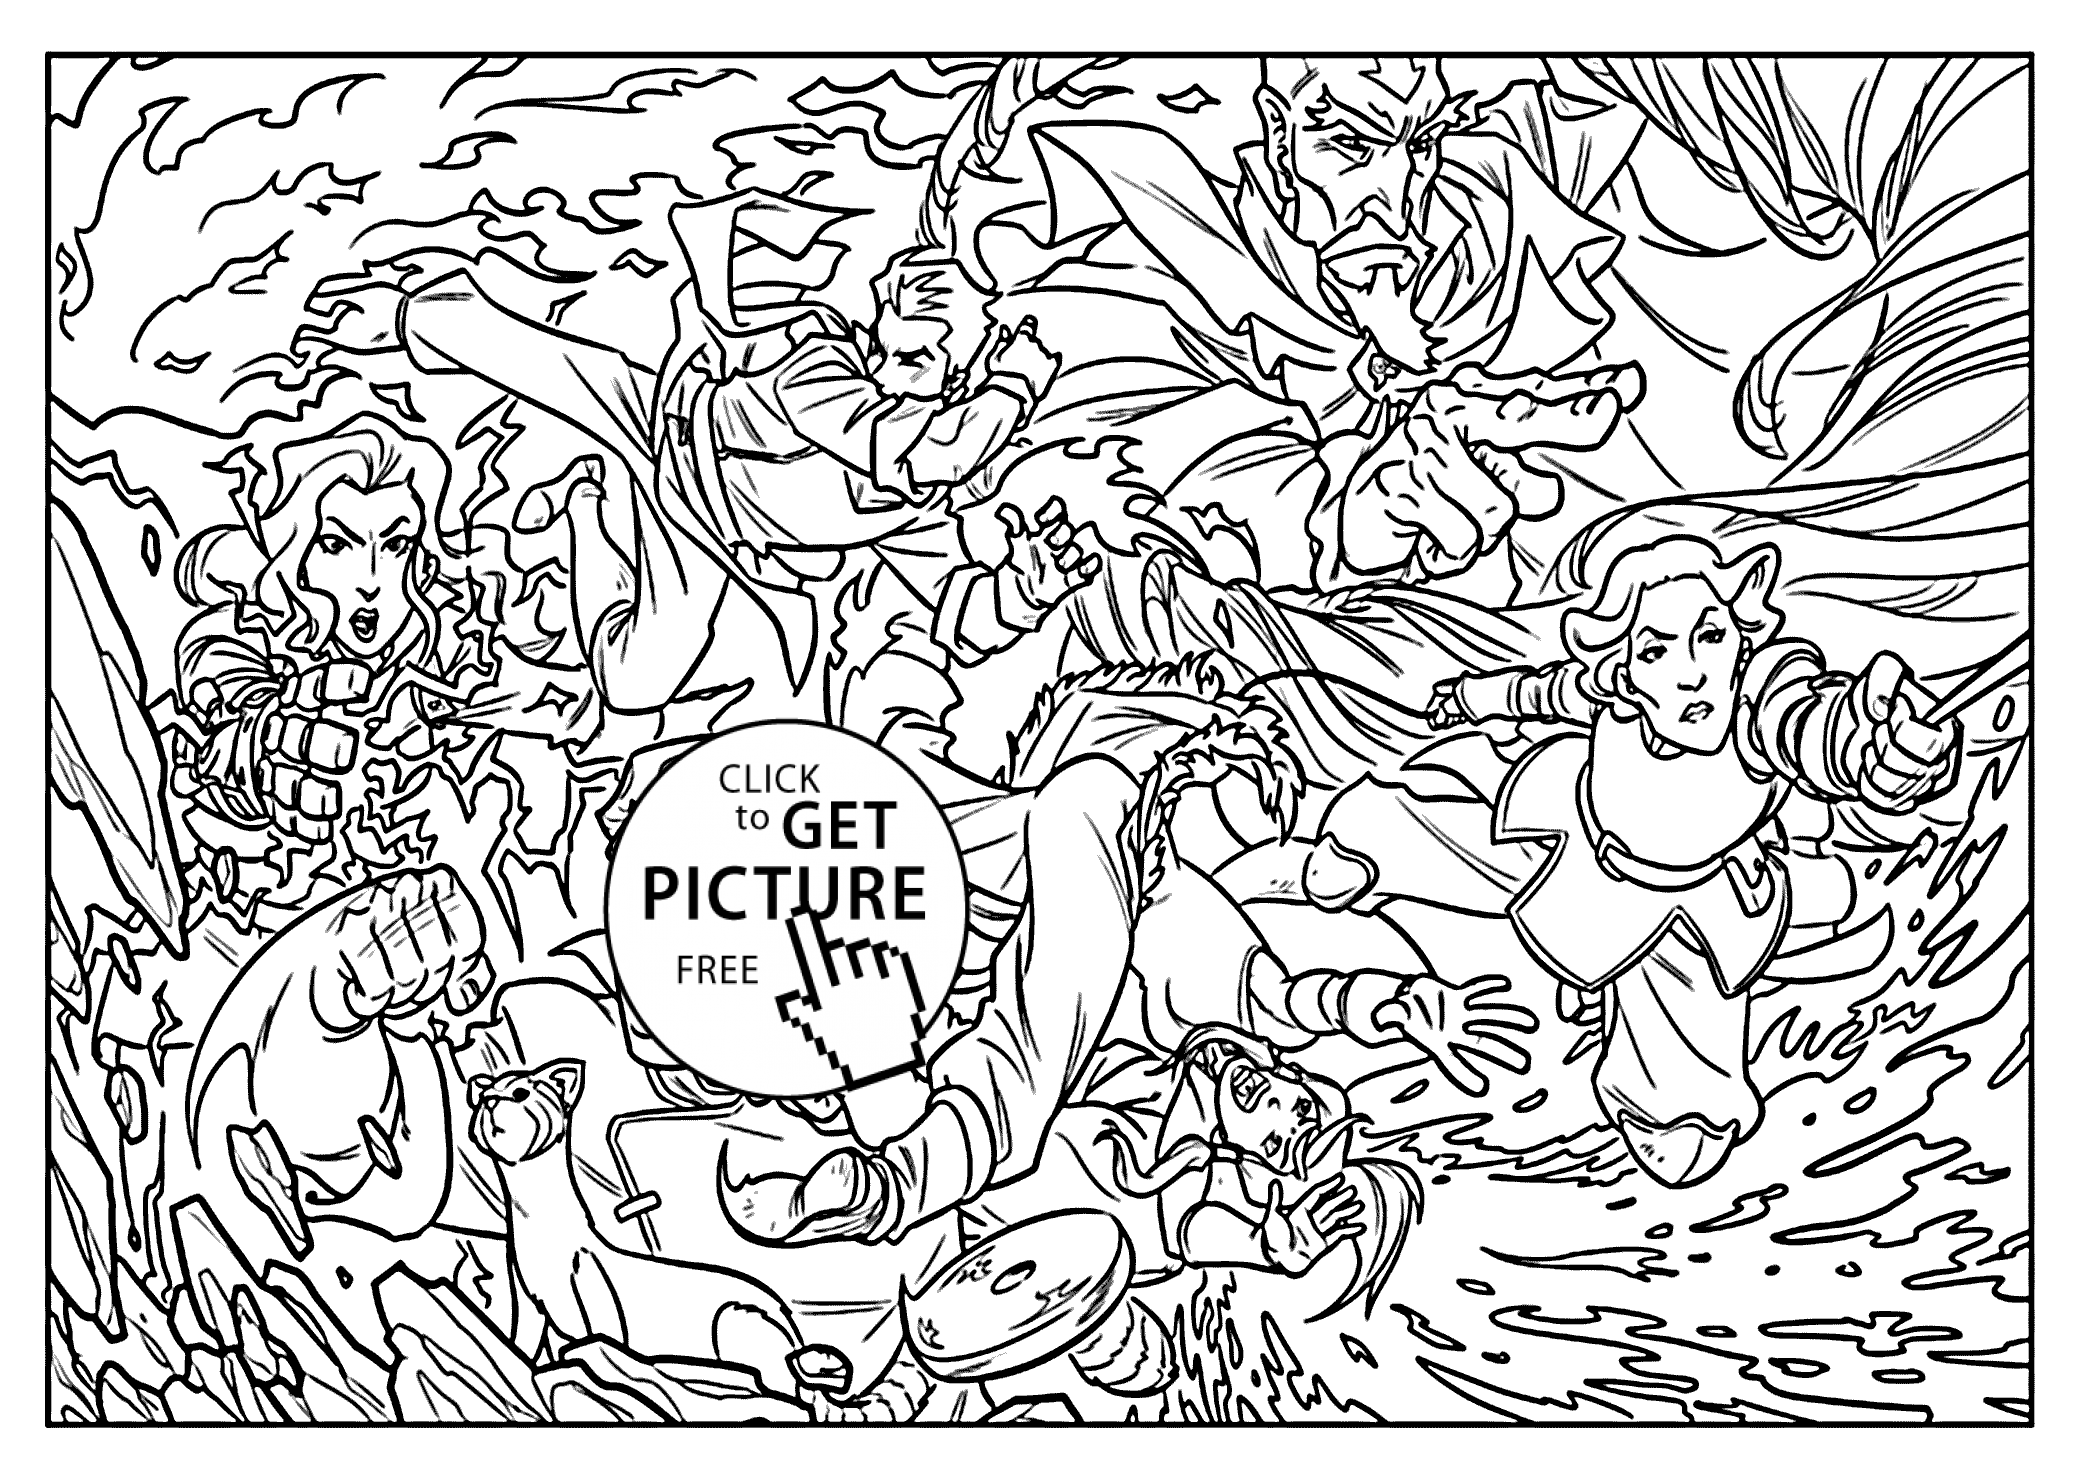 Free legend of korra coloring pages